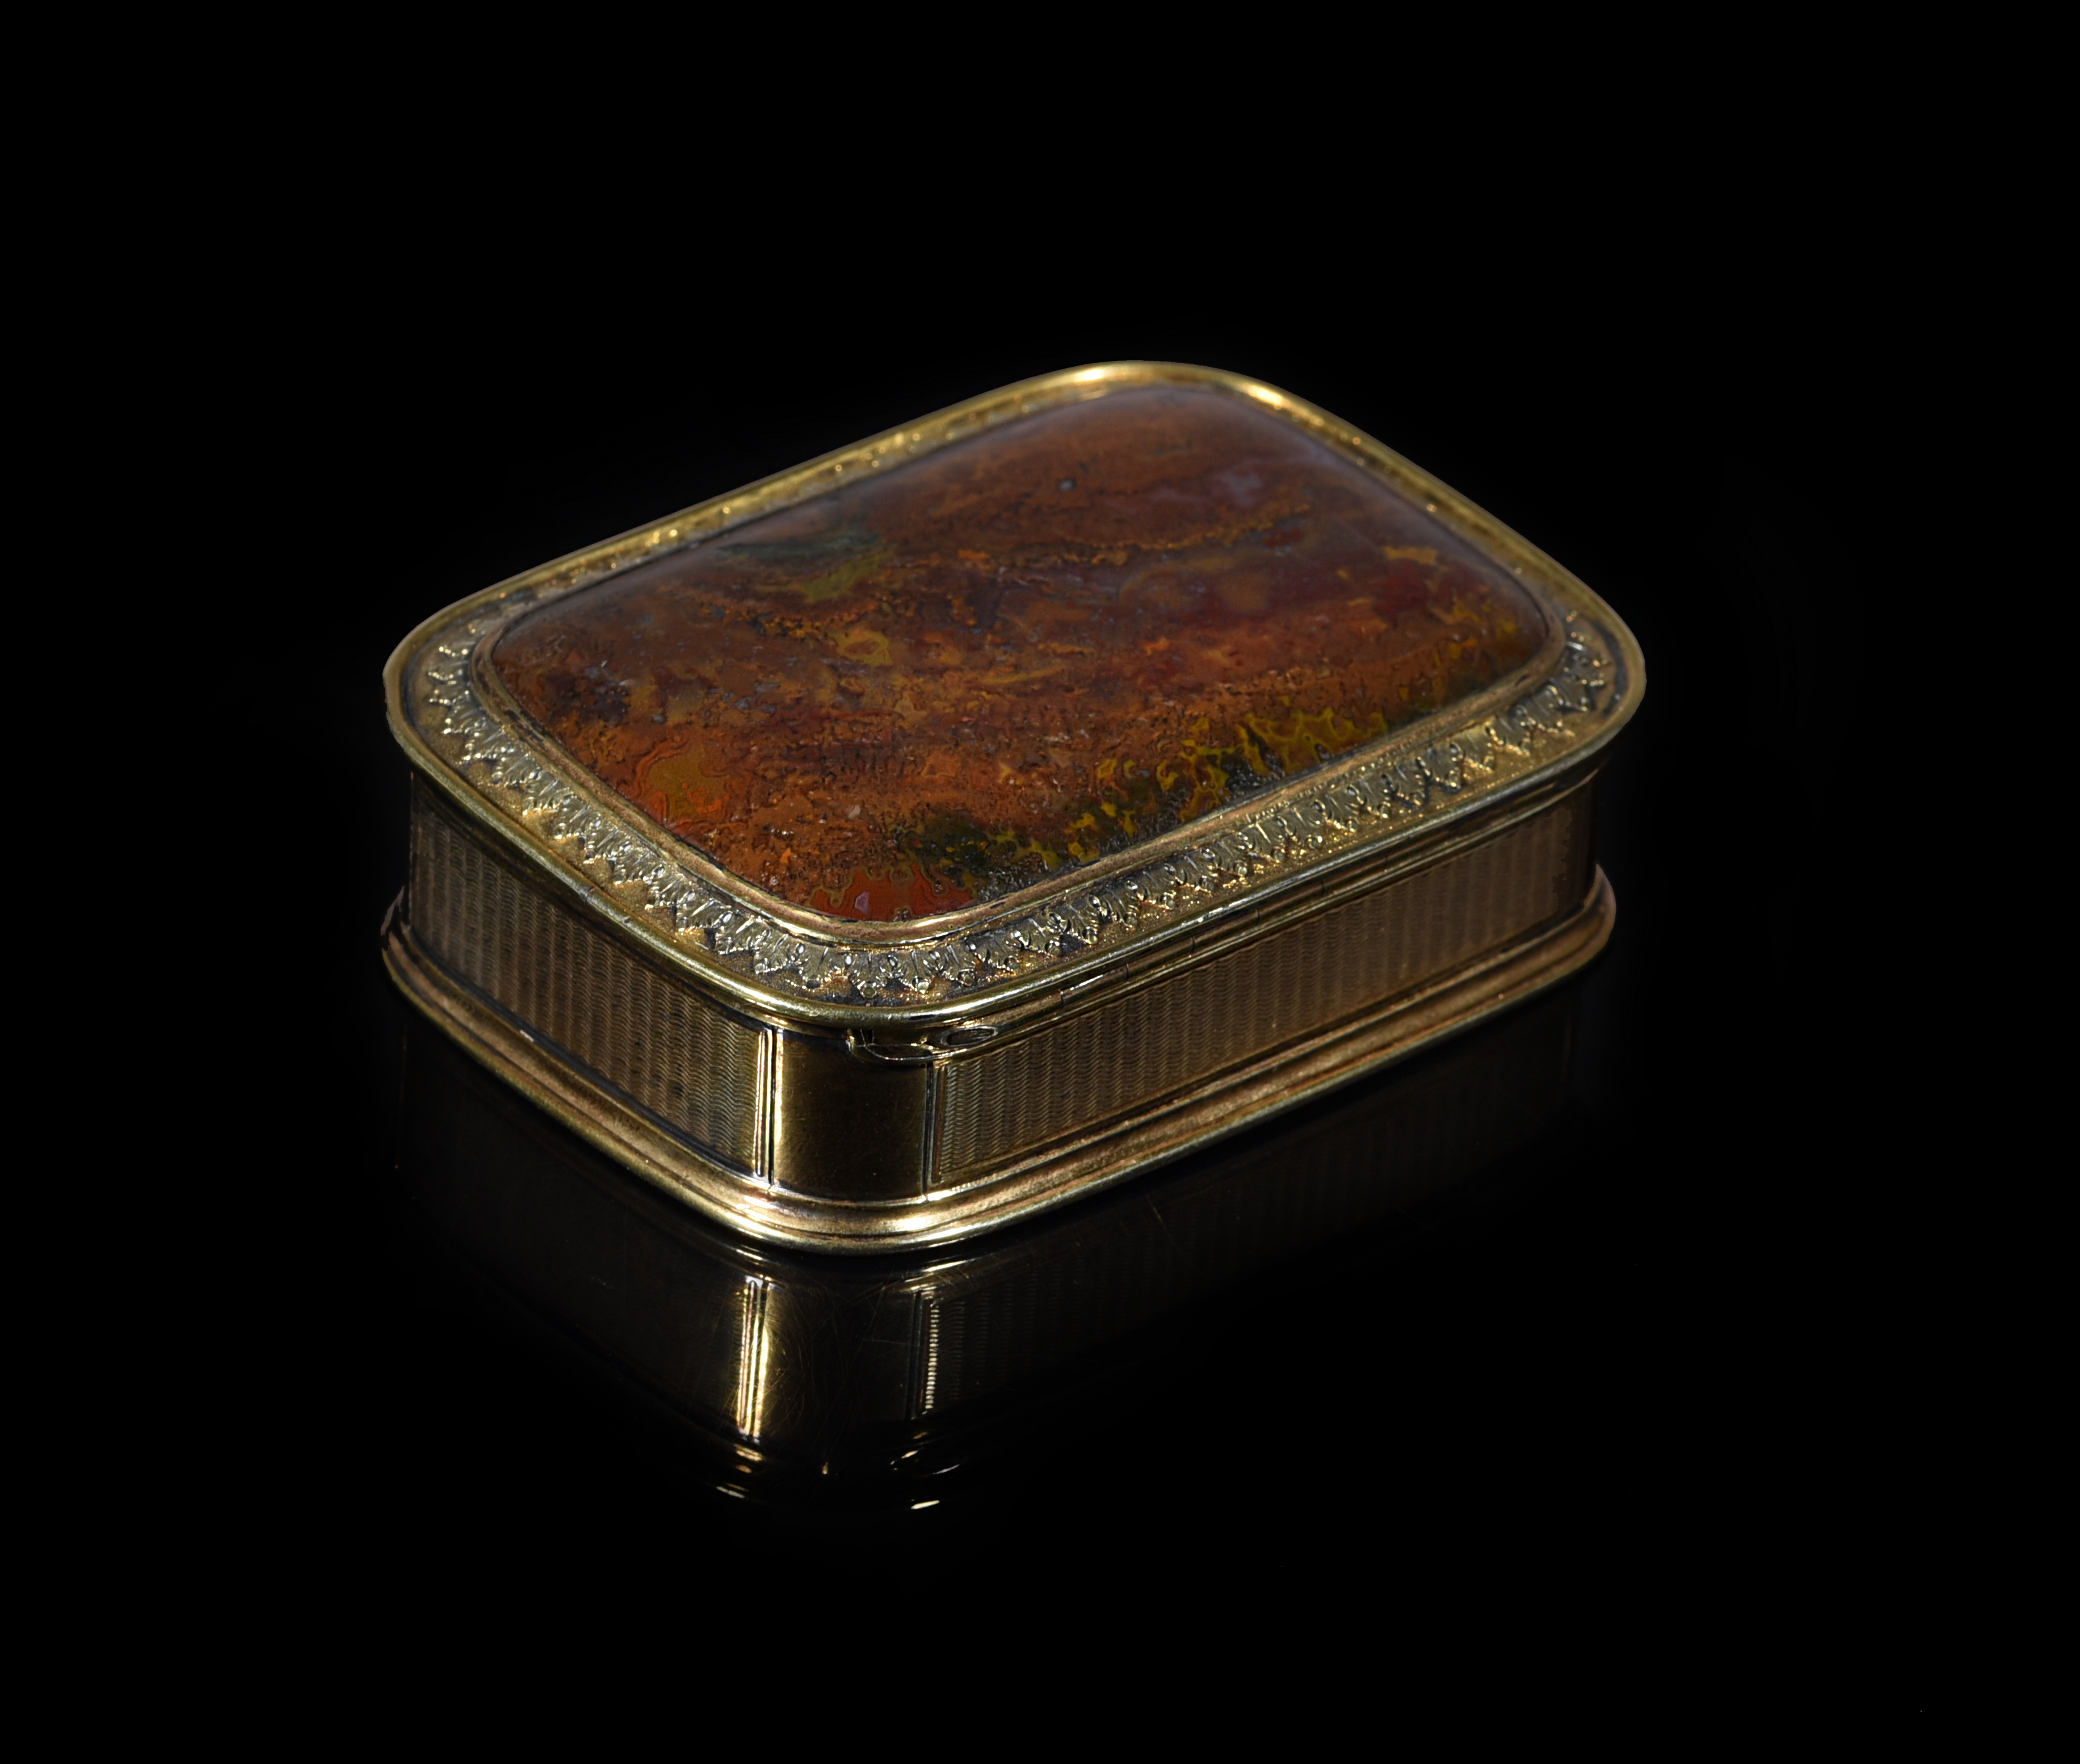 A SILVER-GILT MOUNTED AGATE SNUFF BOX UNMARKED, C.1830 of rounded rectangular form, the hinged cover